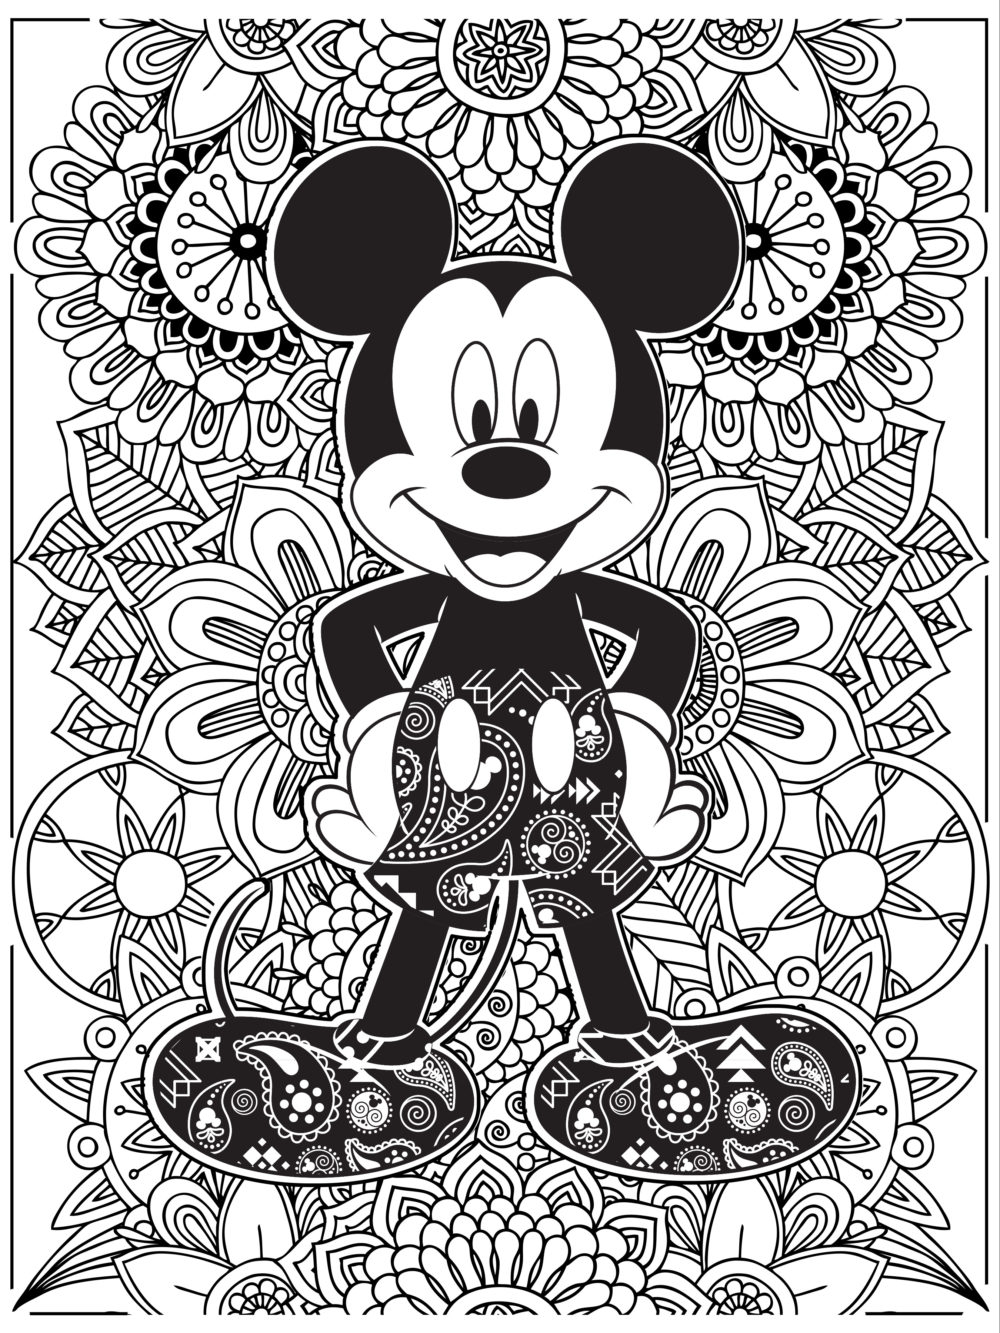 Disney.com Coloring Pages Celebrate National Coloring Book Day With Disney Style